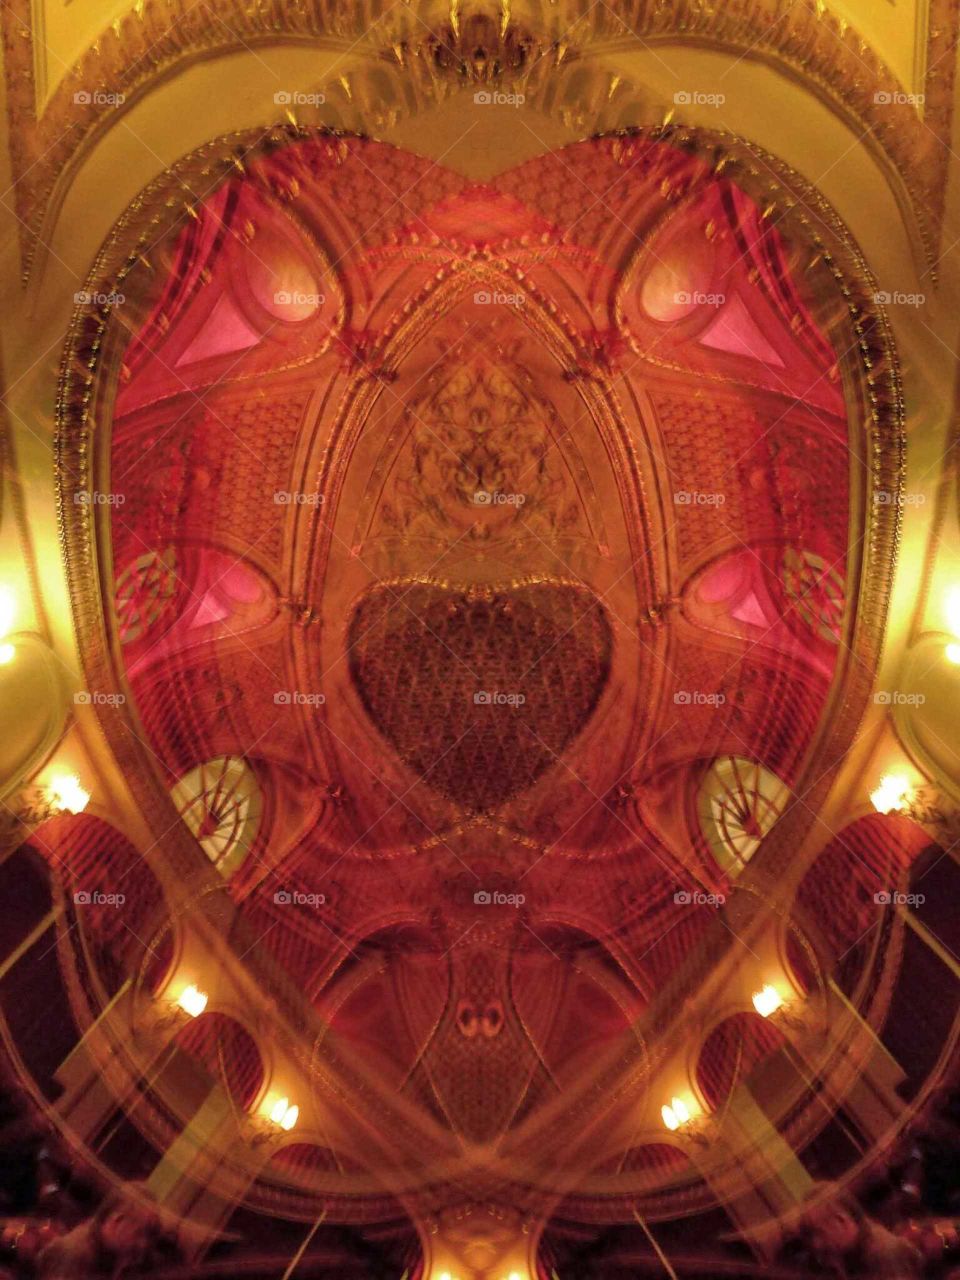 Chicago theater ceiling